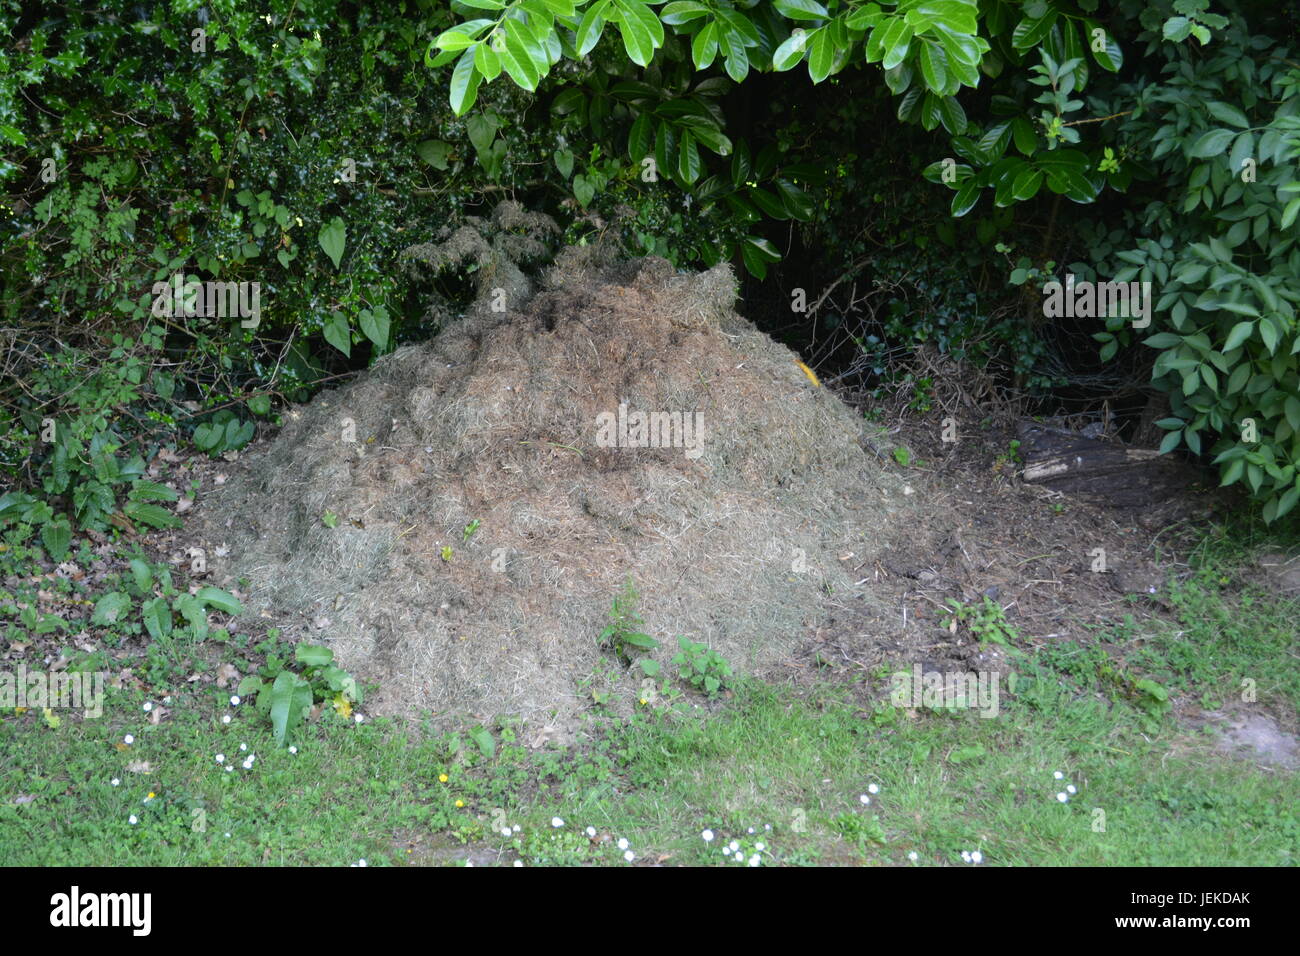 Grass cuttings compost heap in garden with grass at front and shrubs bushes to background Herefordshire England UK Stock Photo